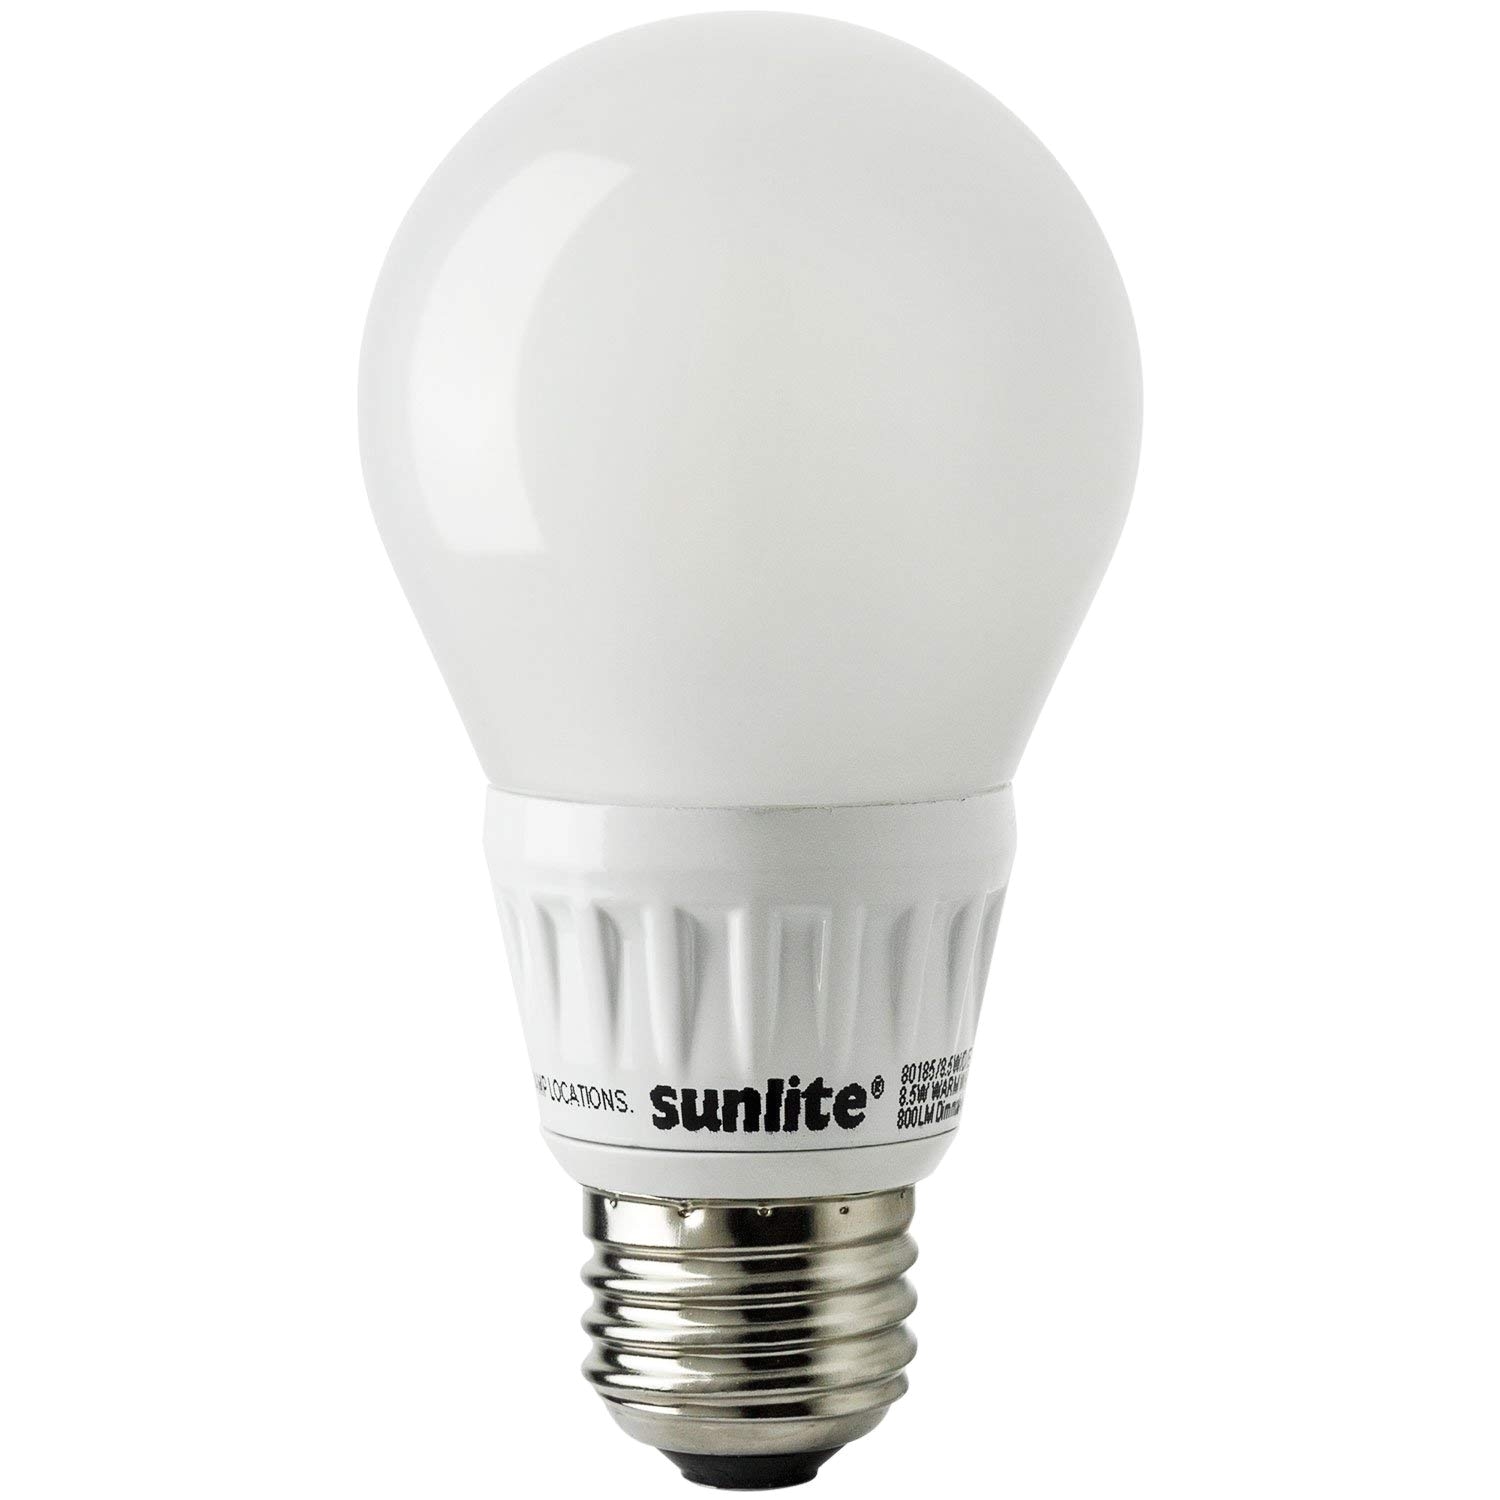 sunlite a19 8 5w d e 27k od led 2700k a19 8 5w 60w replacement 120v medium base a type household with dimmable energy star light bulb warm white